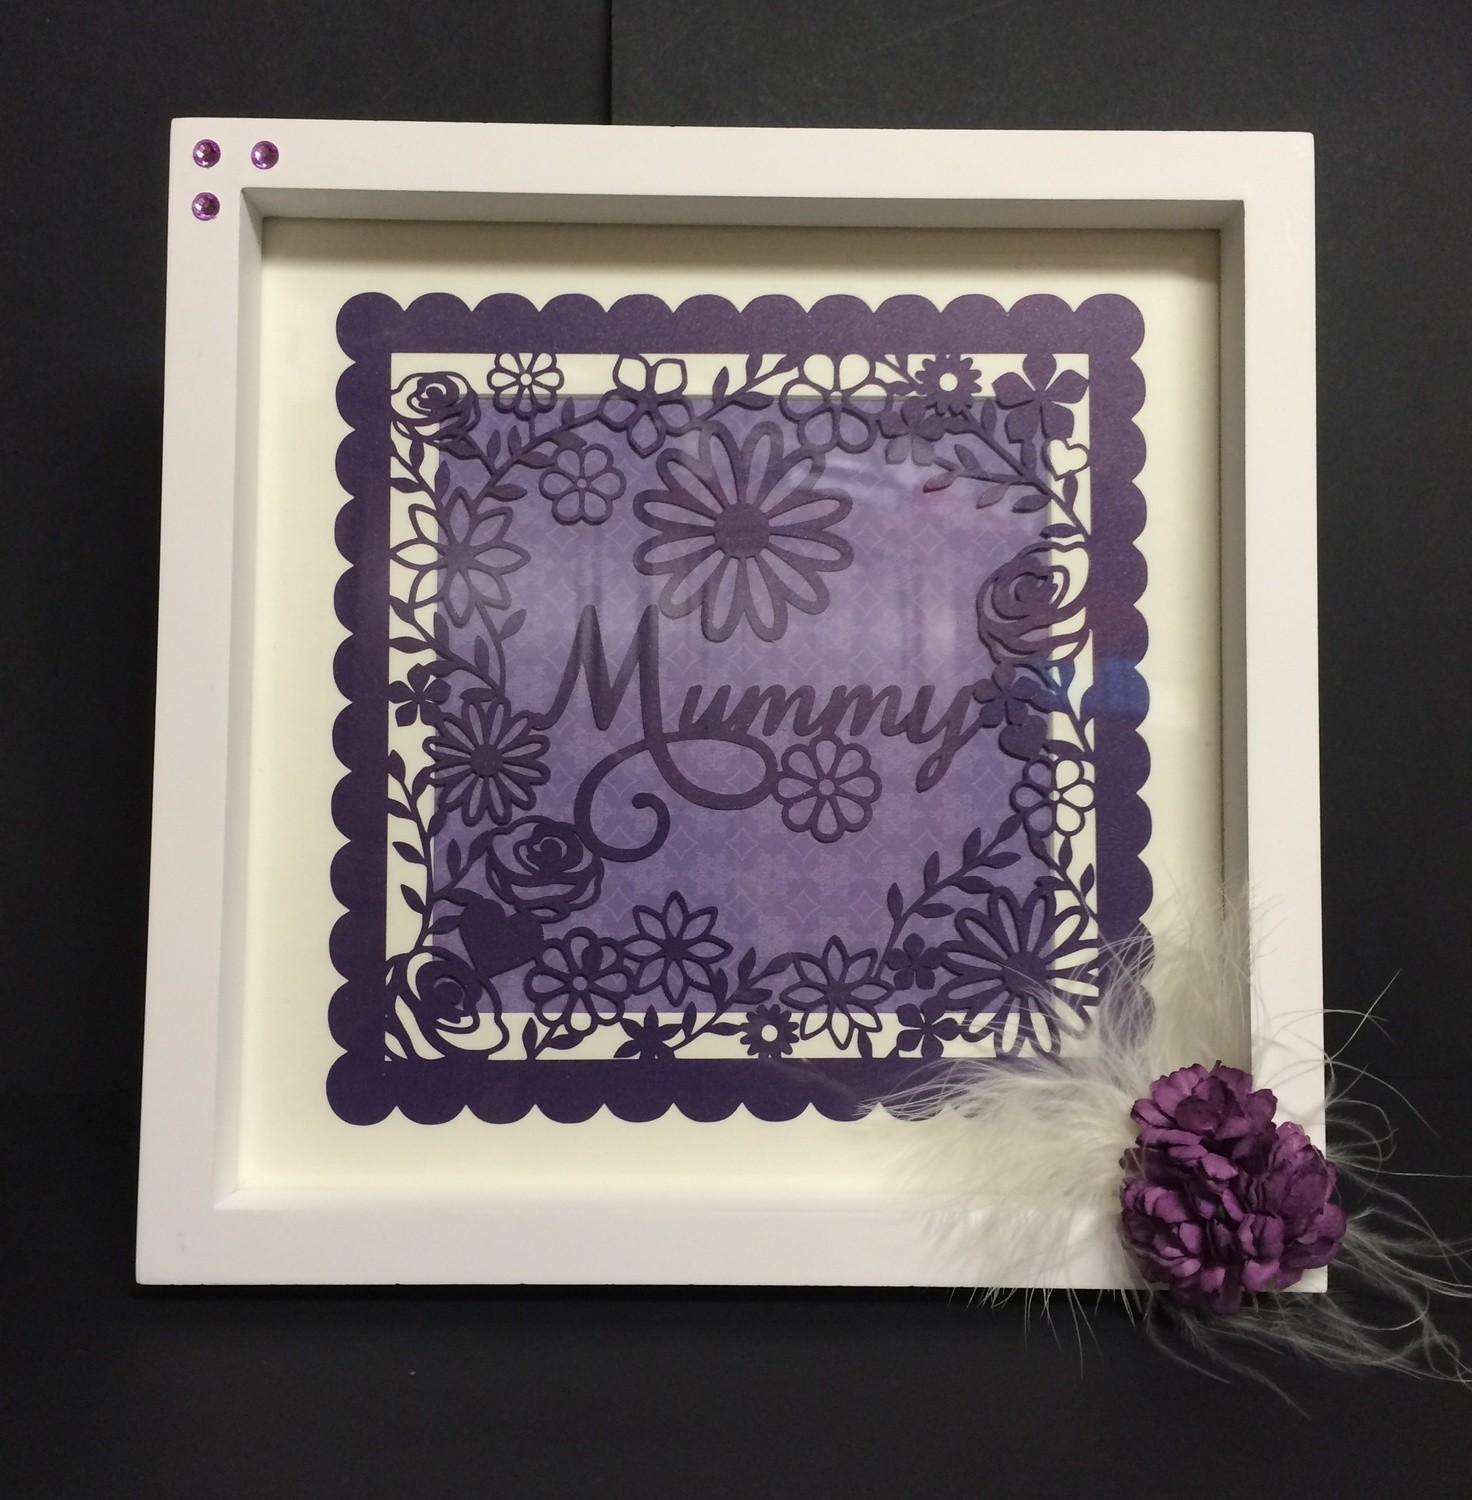 Mummy - decorative frame ideal for Mother's Day.